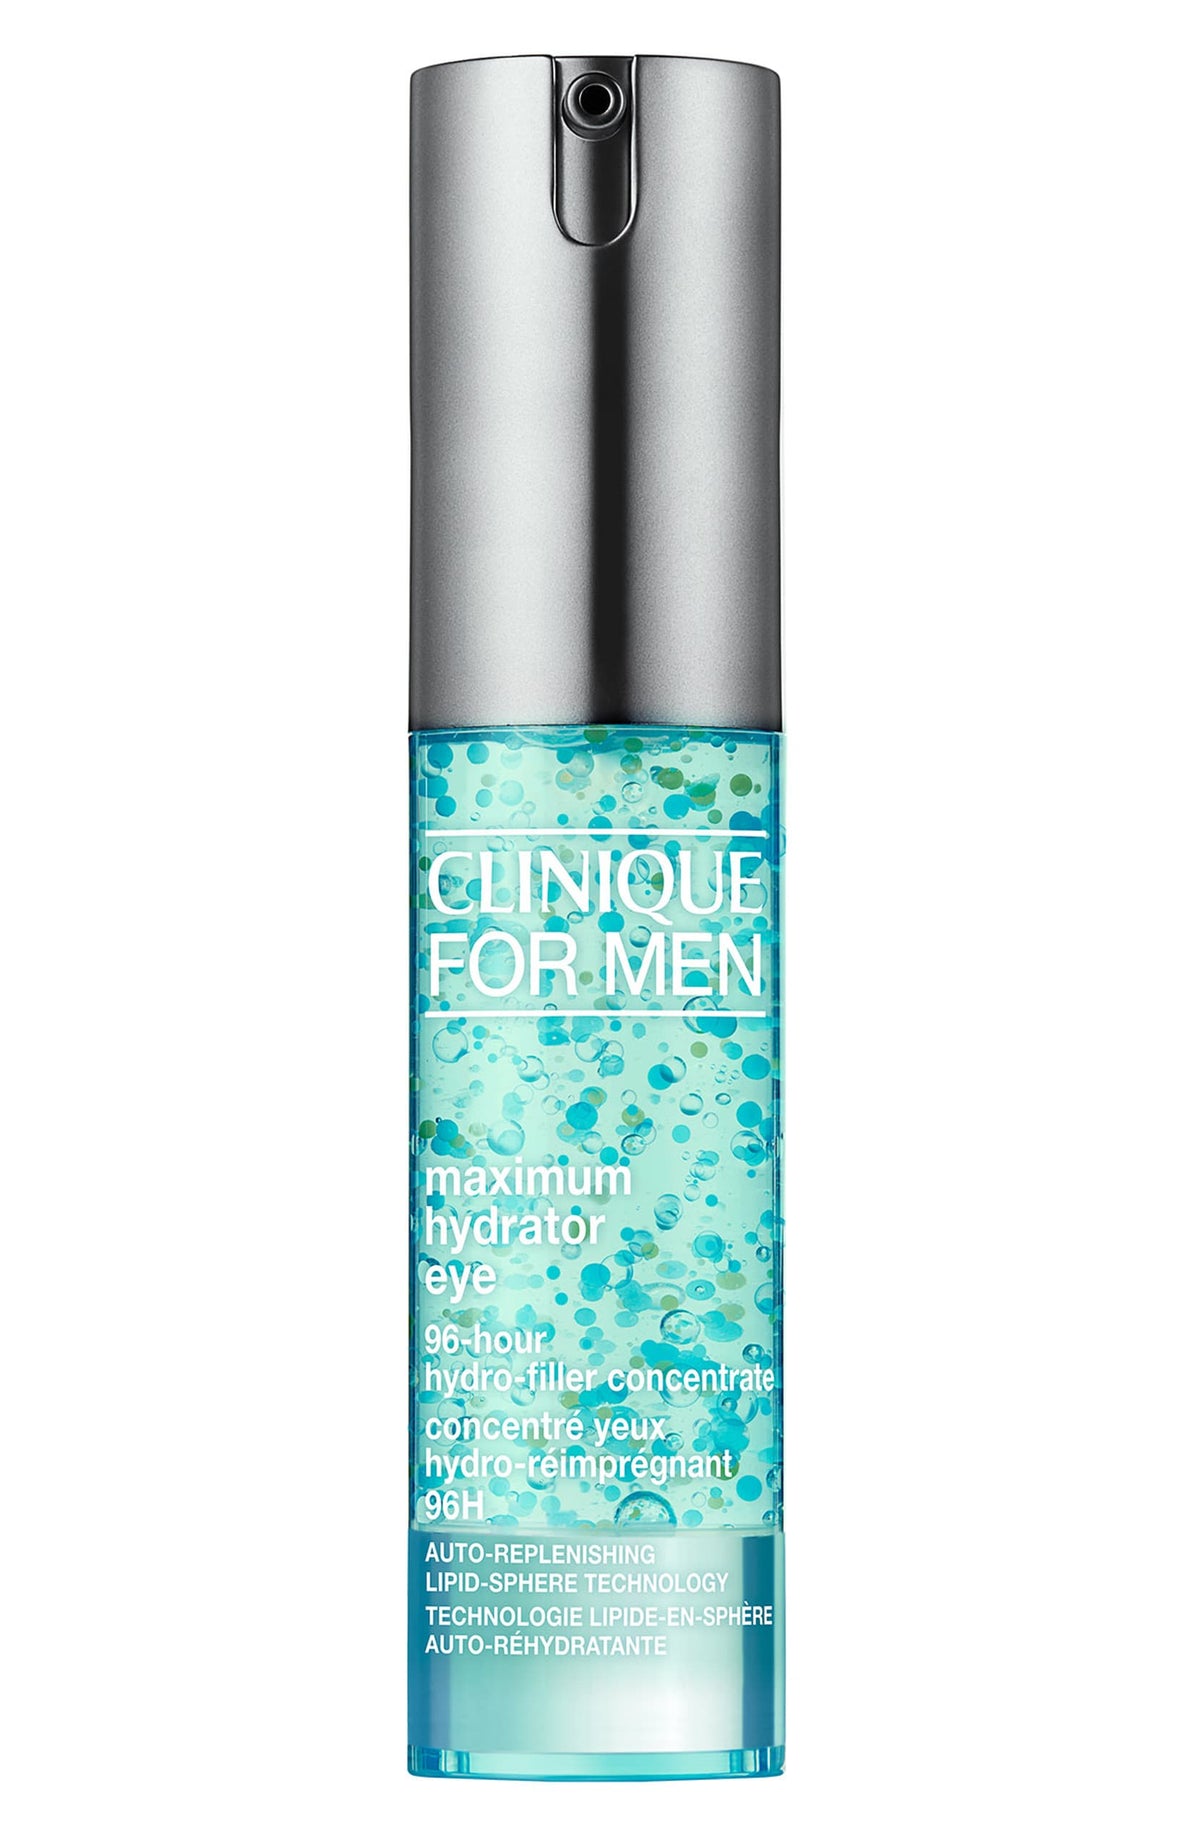 Clinique For Men Maximum Hydrator Eye 96-Hour Hydro-Filler Concentrate - eCosmeticWorld